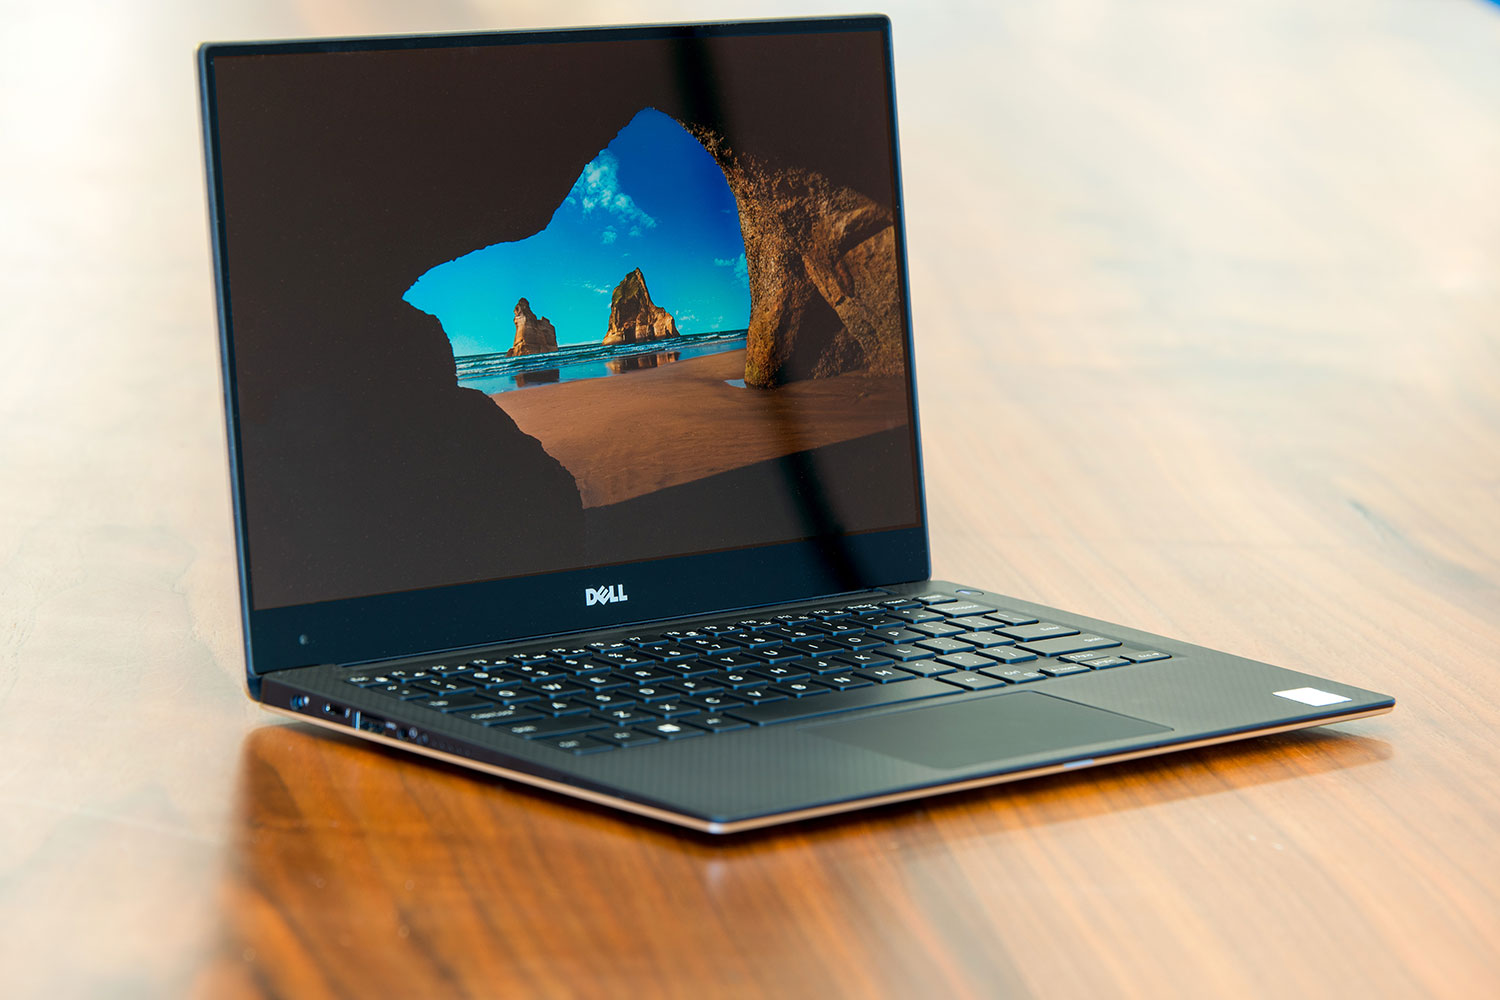 Dell XPS 13 Gold 2016